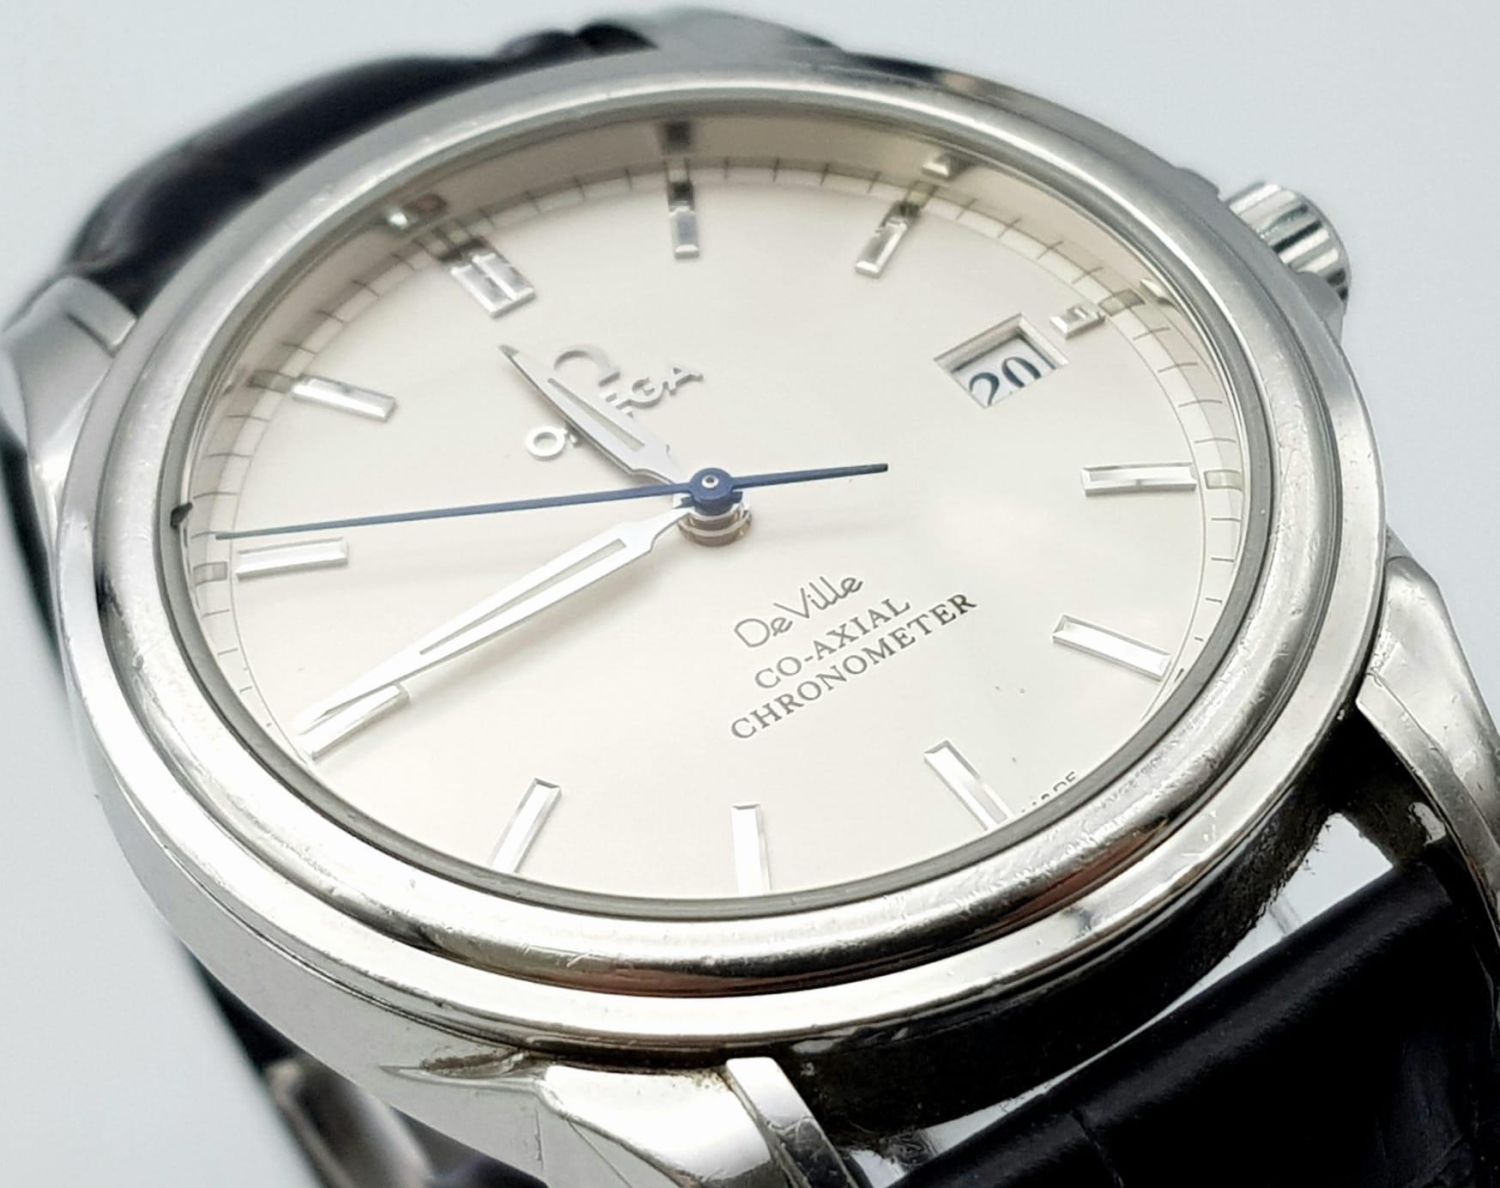 OMEGA DE VILLE CO AXIAL CHRONOMETER STAINLESS STEEL WATCH, WHITE FACE AND DIALS WITH BLACK LEATHER - Image 7 of 12